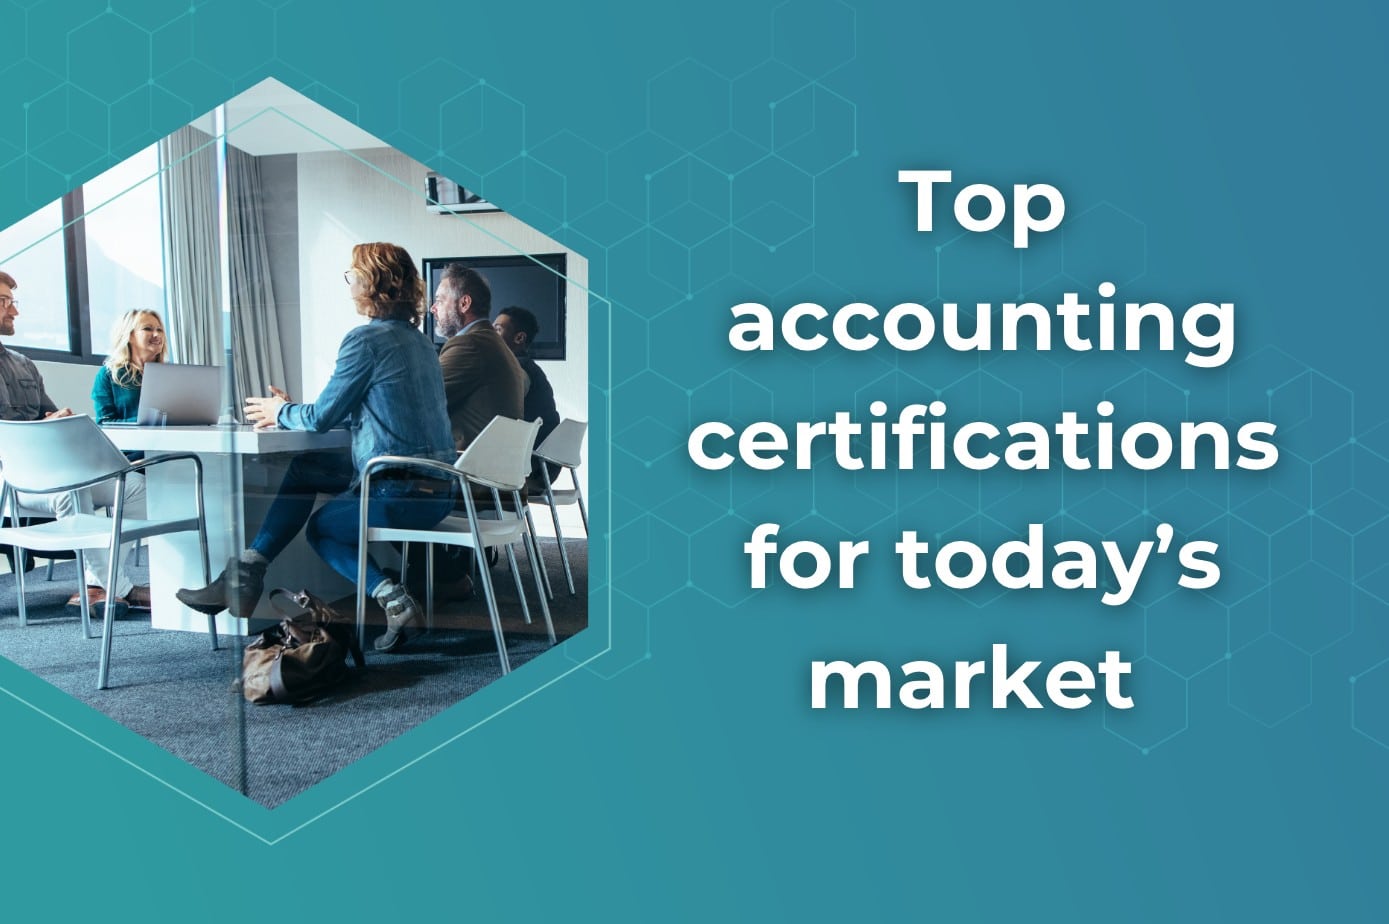 Top accounting certifications for today’s market 